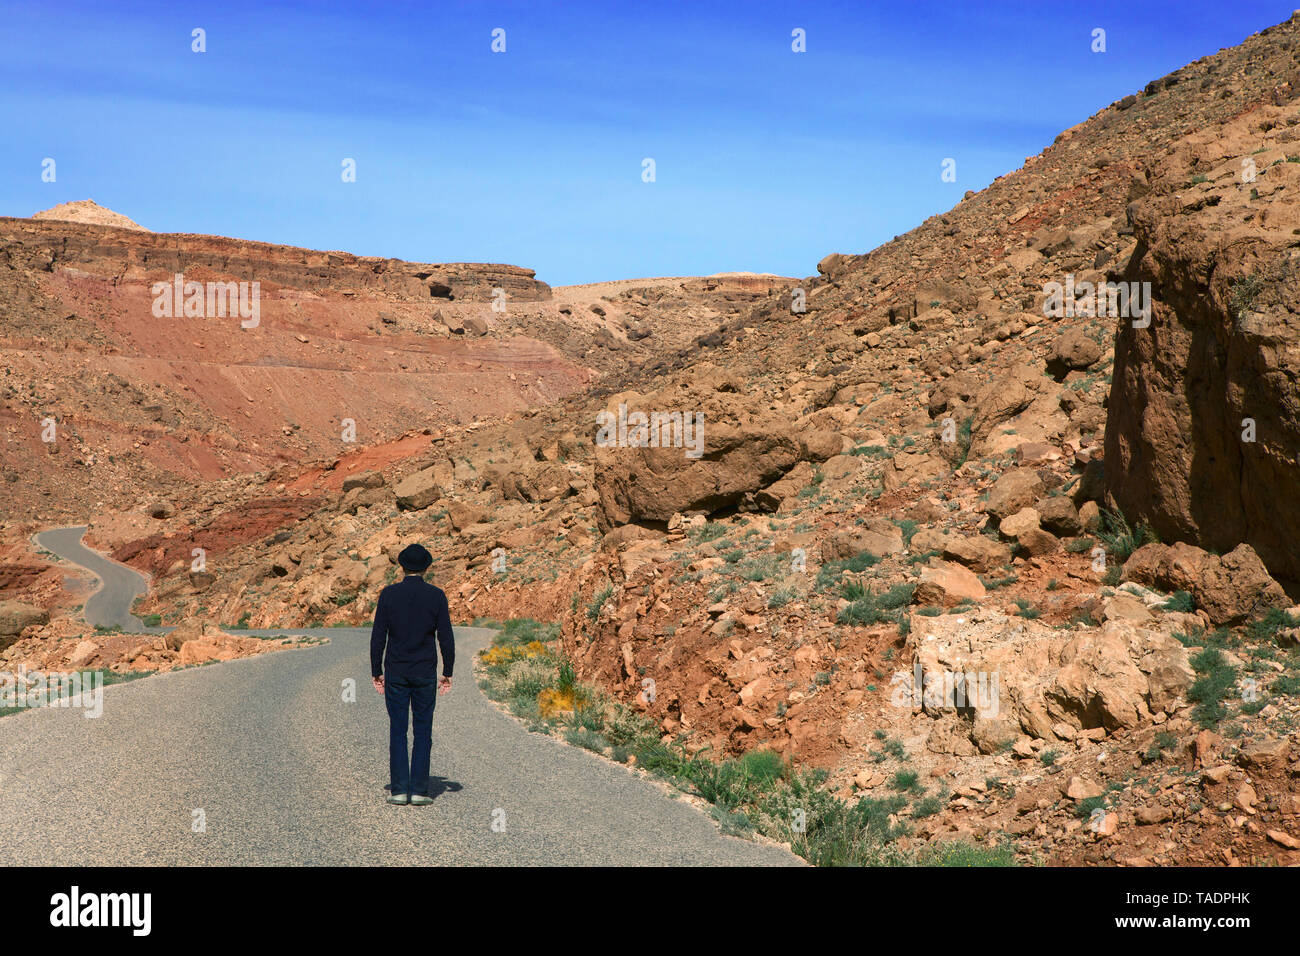 Morocco, Ounila Valley, rear view of man wearing a bowler hat standing on road in the mountains Stock Photo